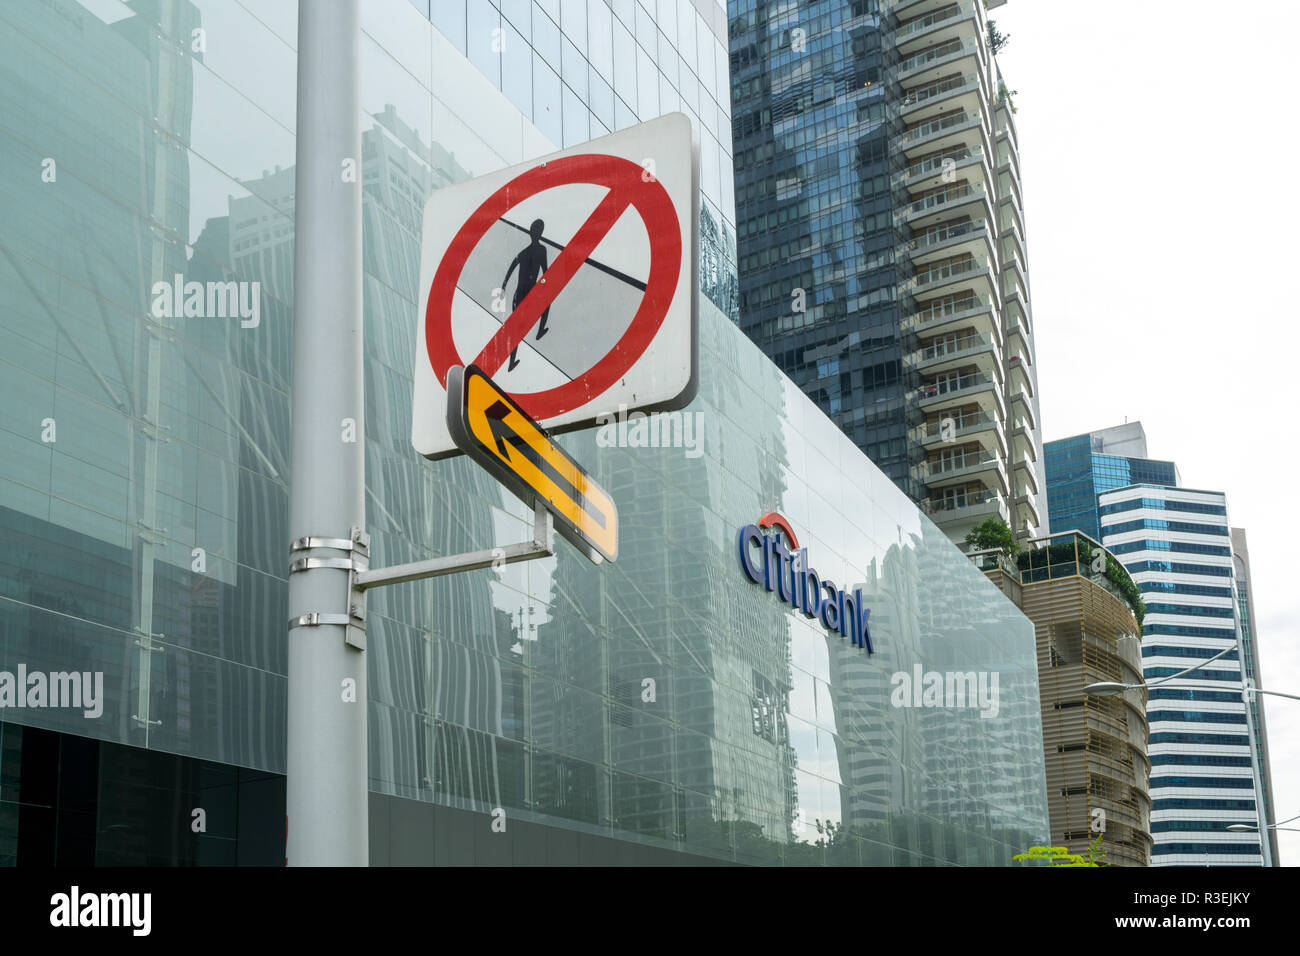 Singapore - September 16 2017: "No pedestrians" road sign next to Citibank sign in the office building in Central Business District in Singapore with  Stock Photo